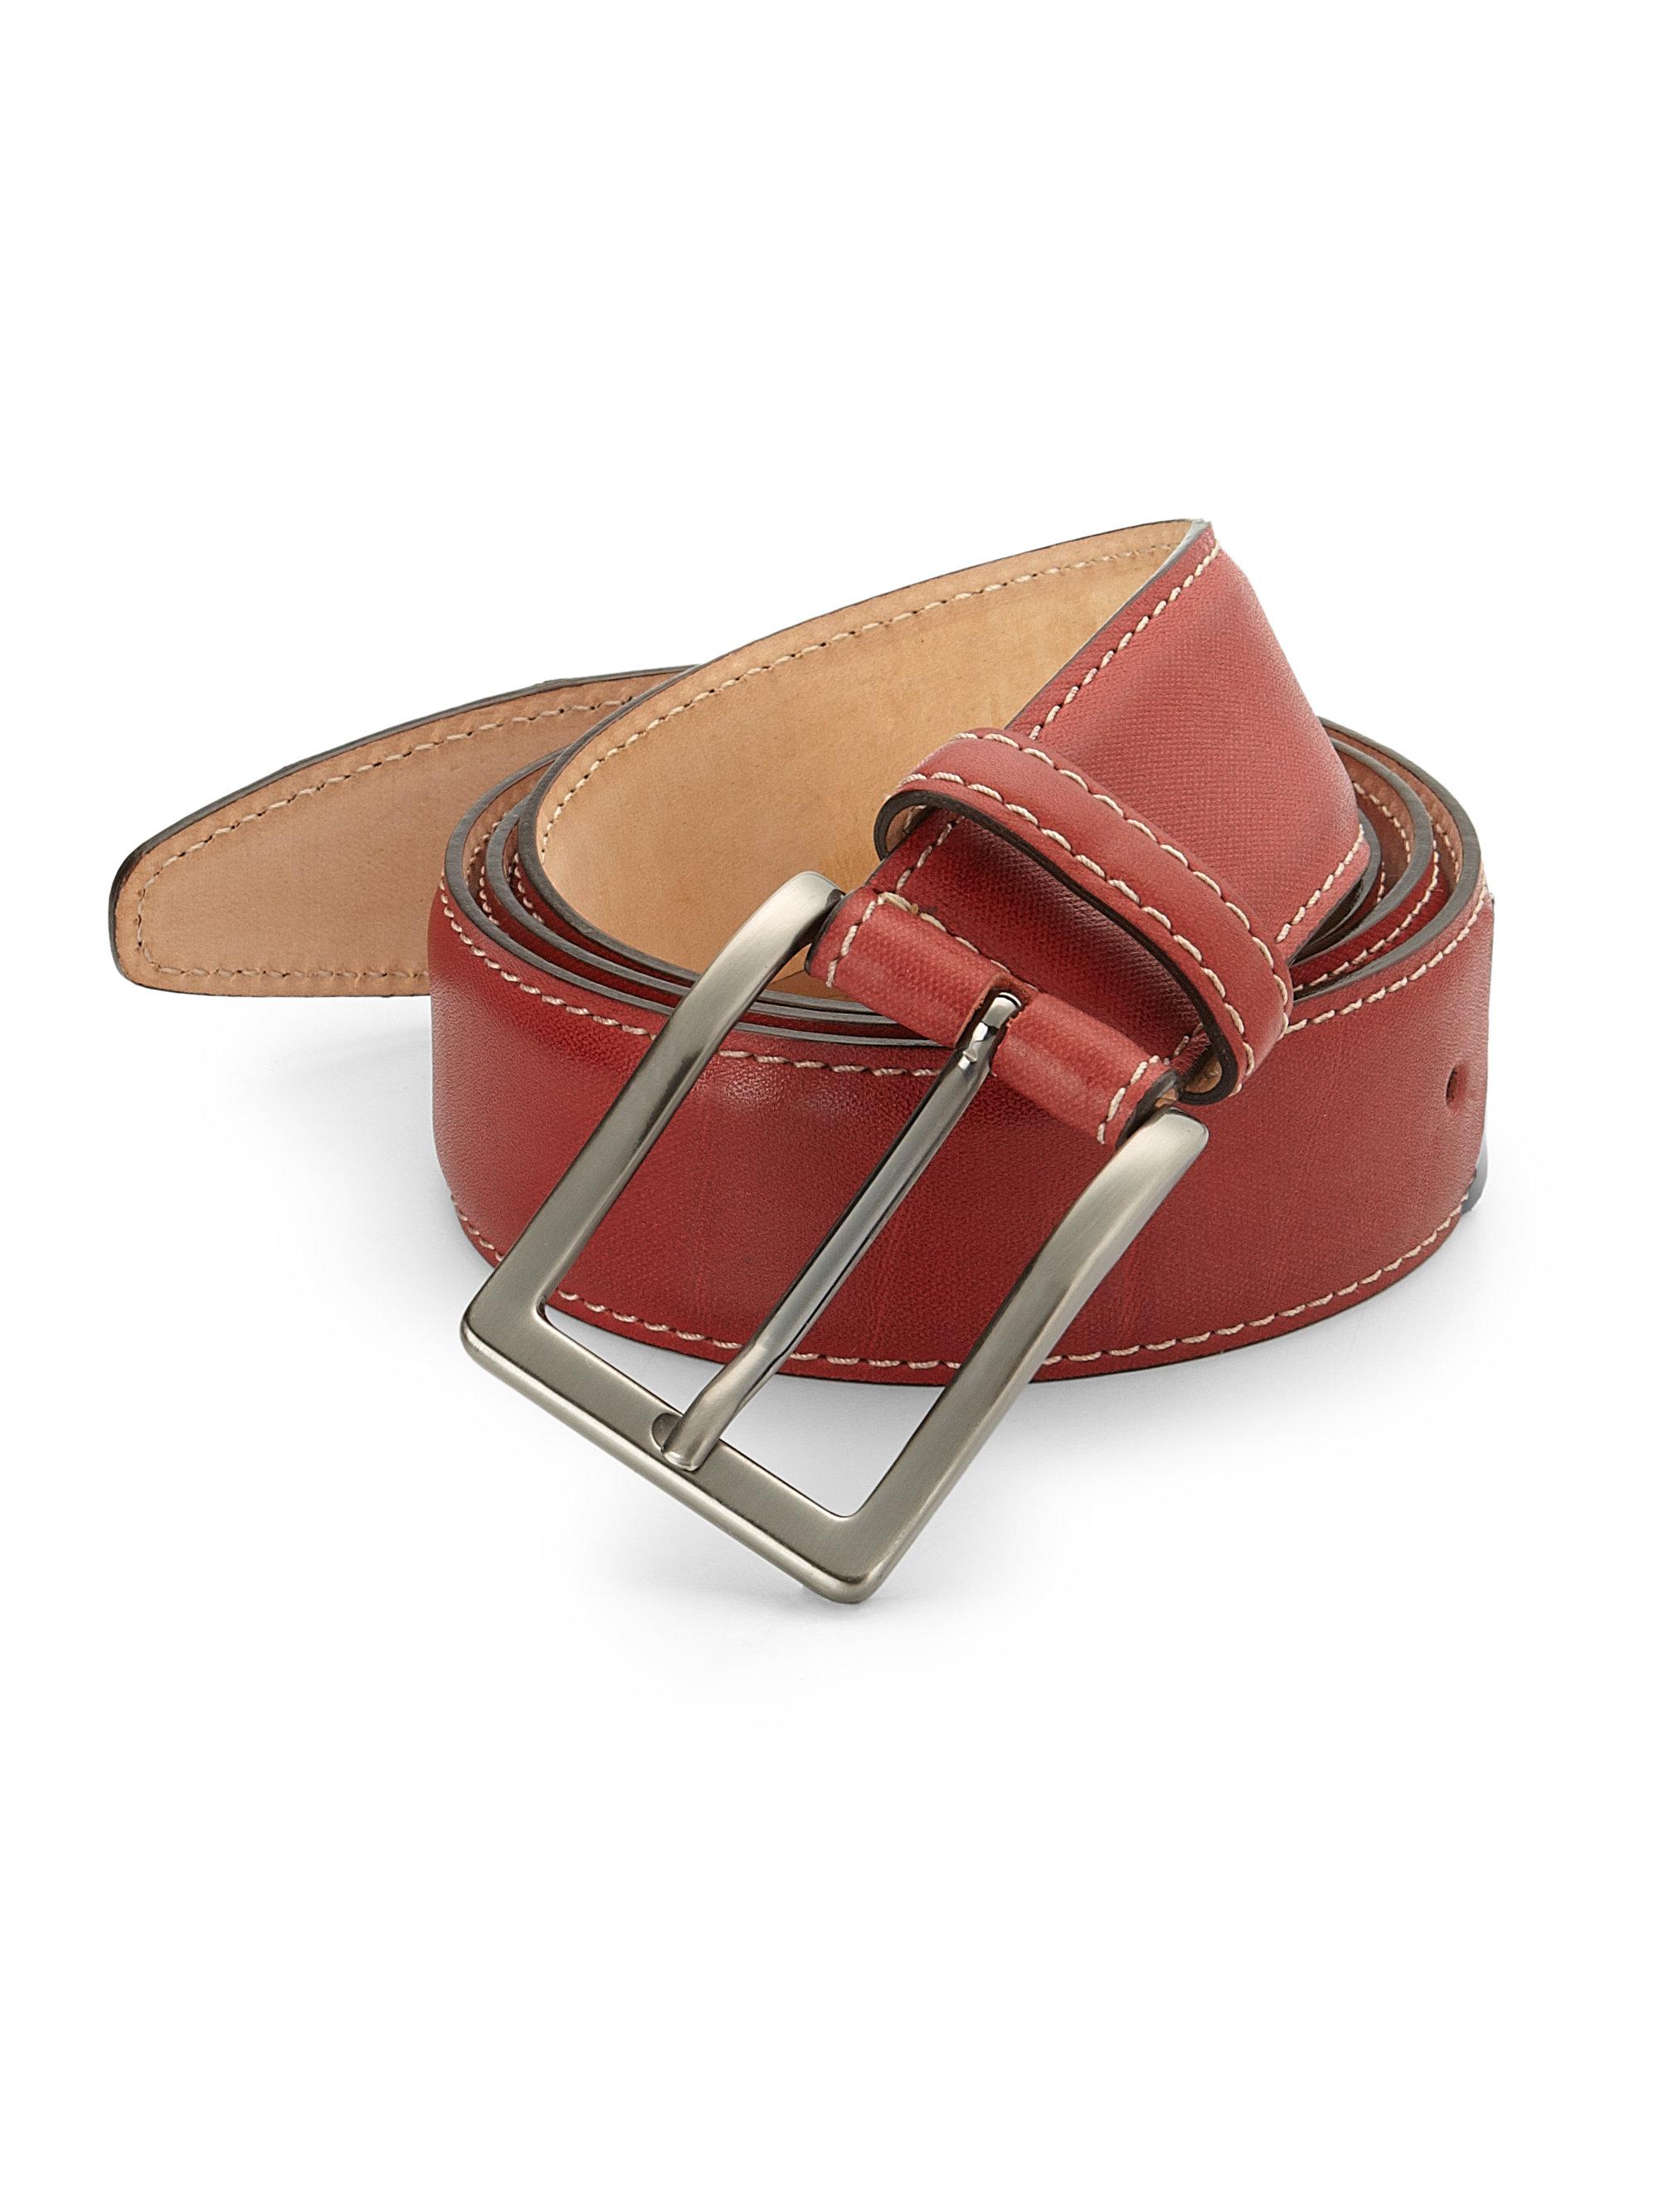 Saks Fifth Avenue Leather Belt in Red for Men - Lyst